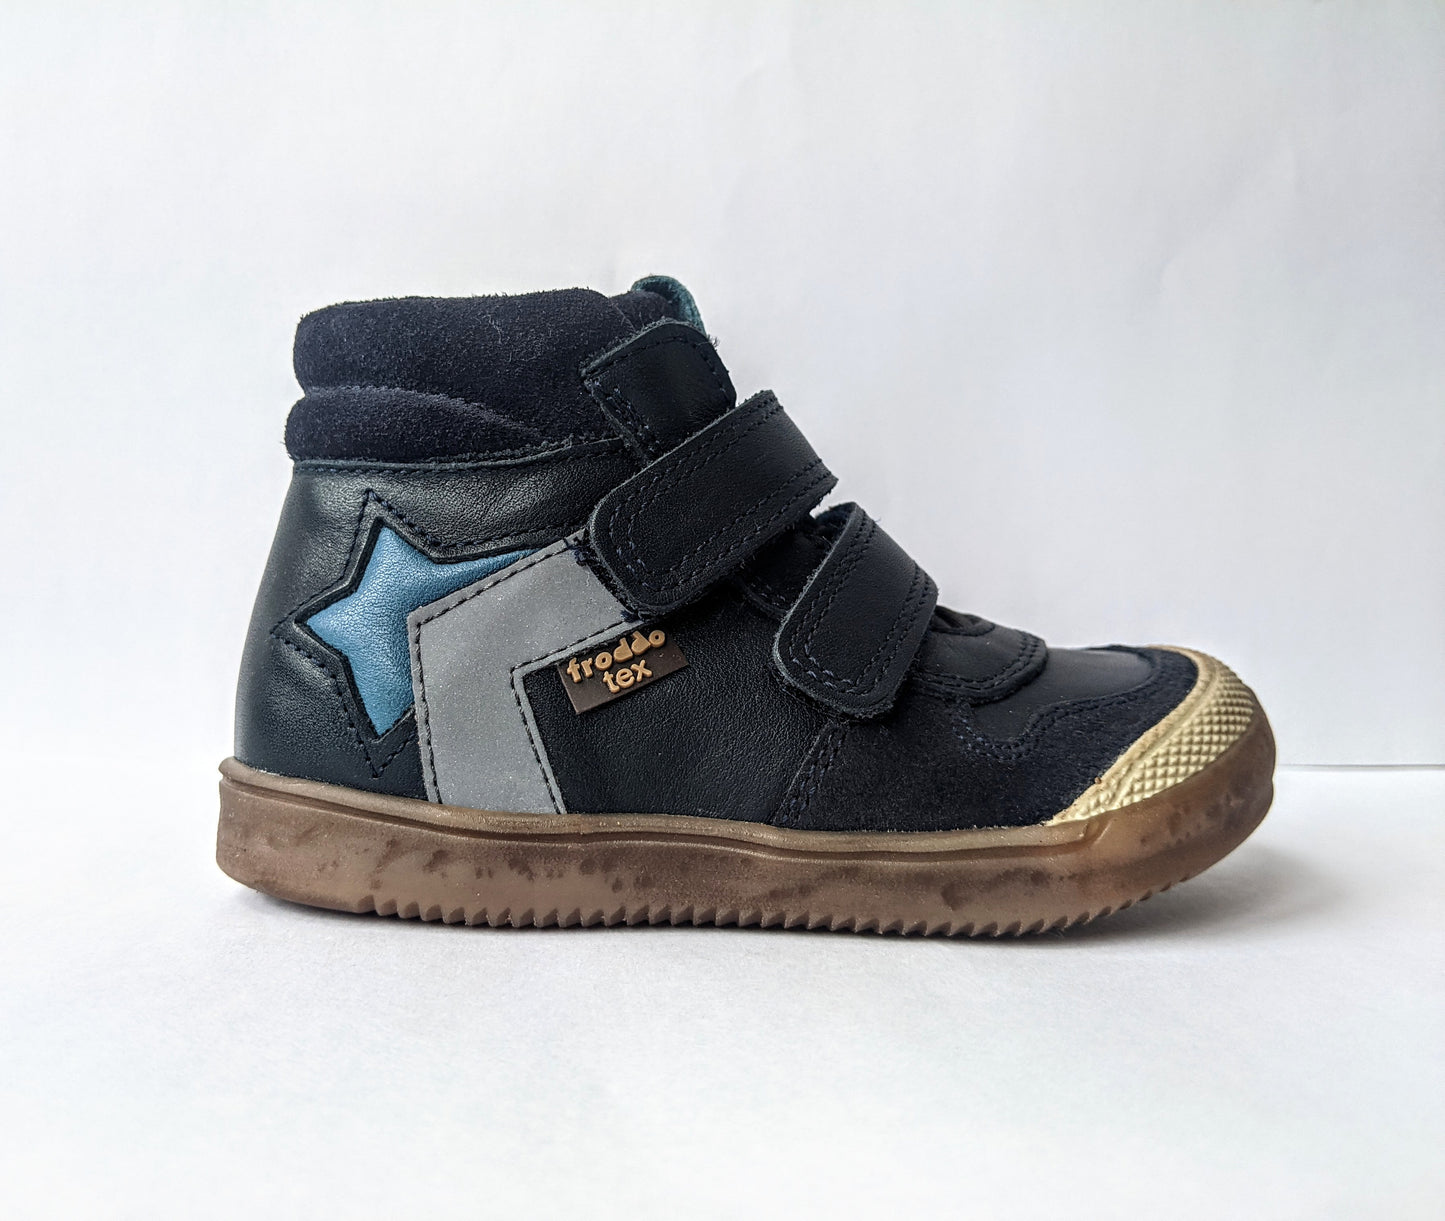 A boys casual boot by Froddo, style G2110083, in Navy and blue leather and nubuck with double velcro fastening. Right side view.